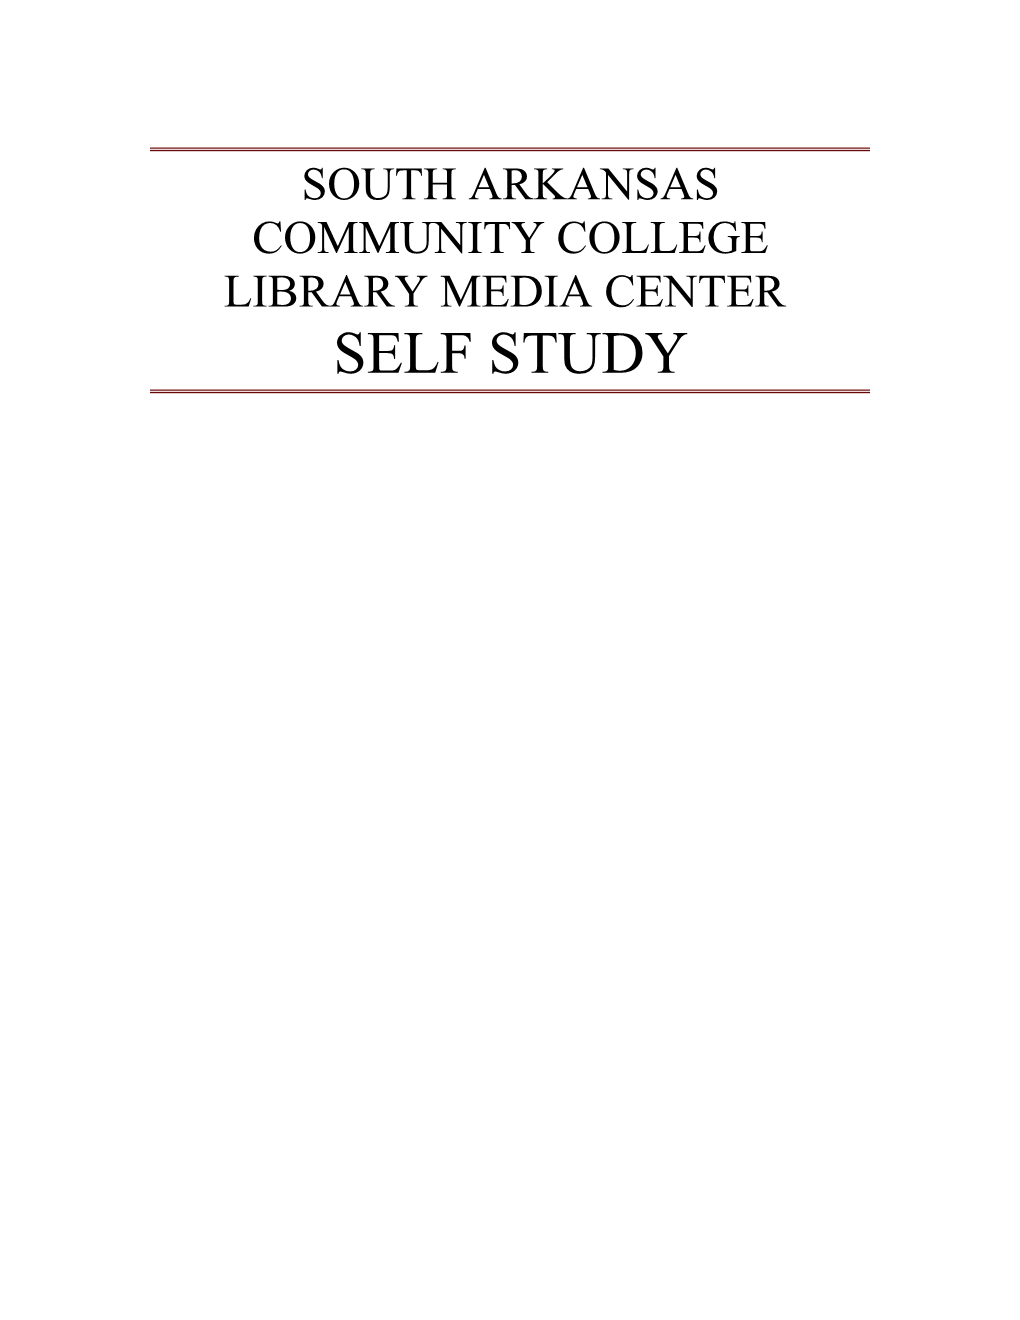 Standard Title: ALA Standard for Community, Junior, and Technicalcollege Learning Resource